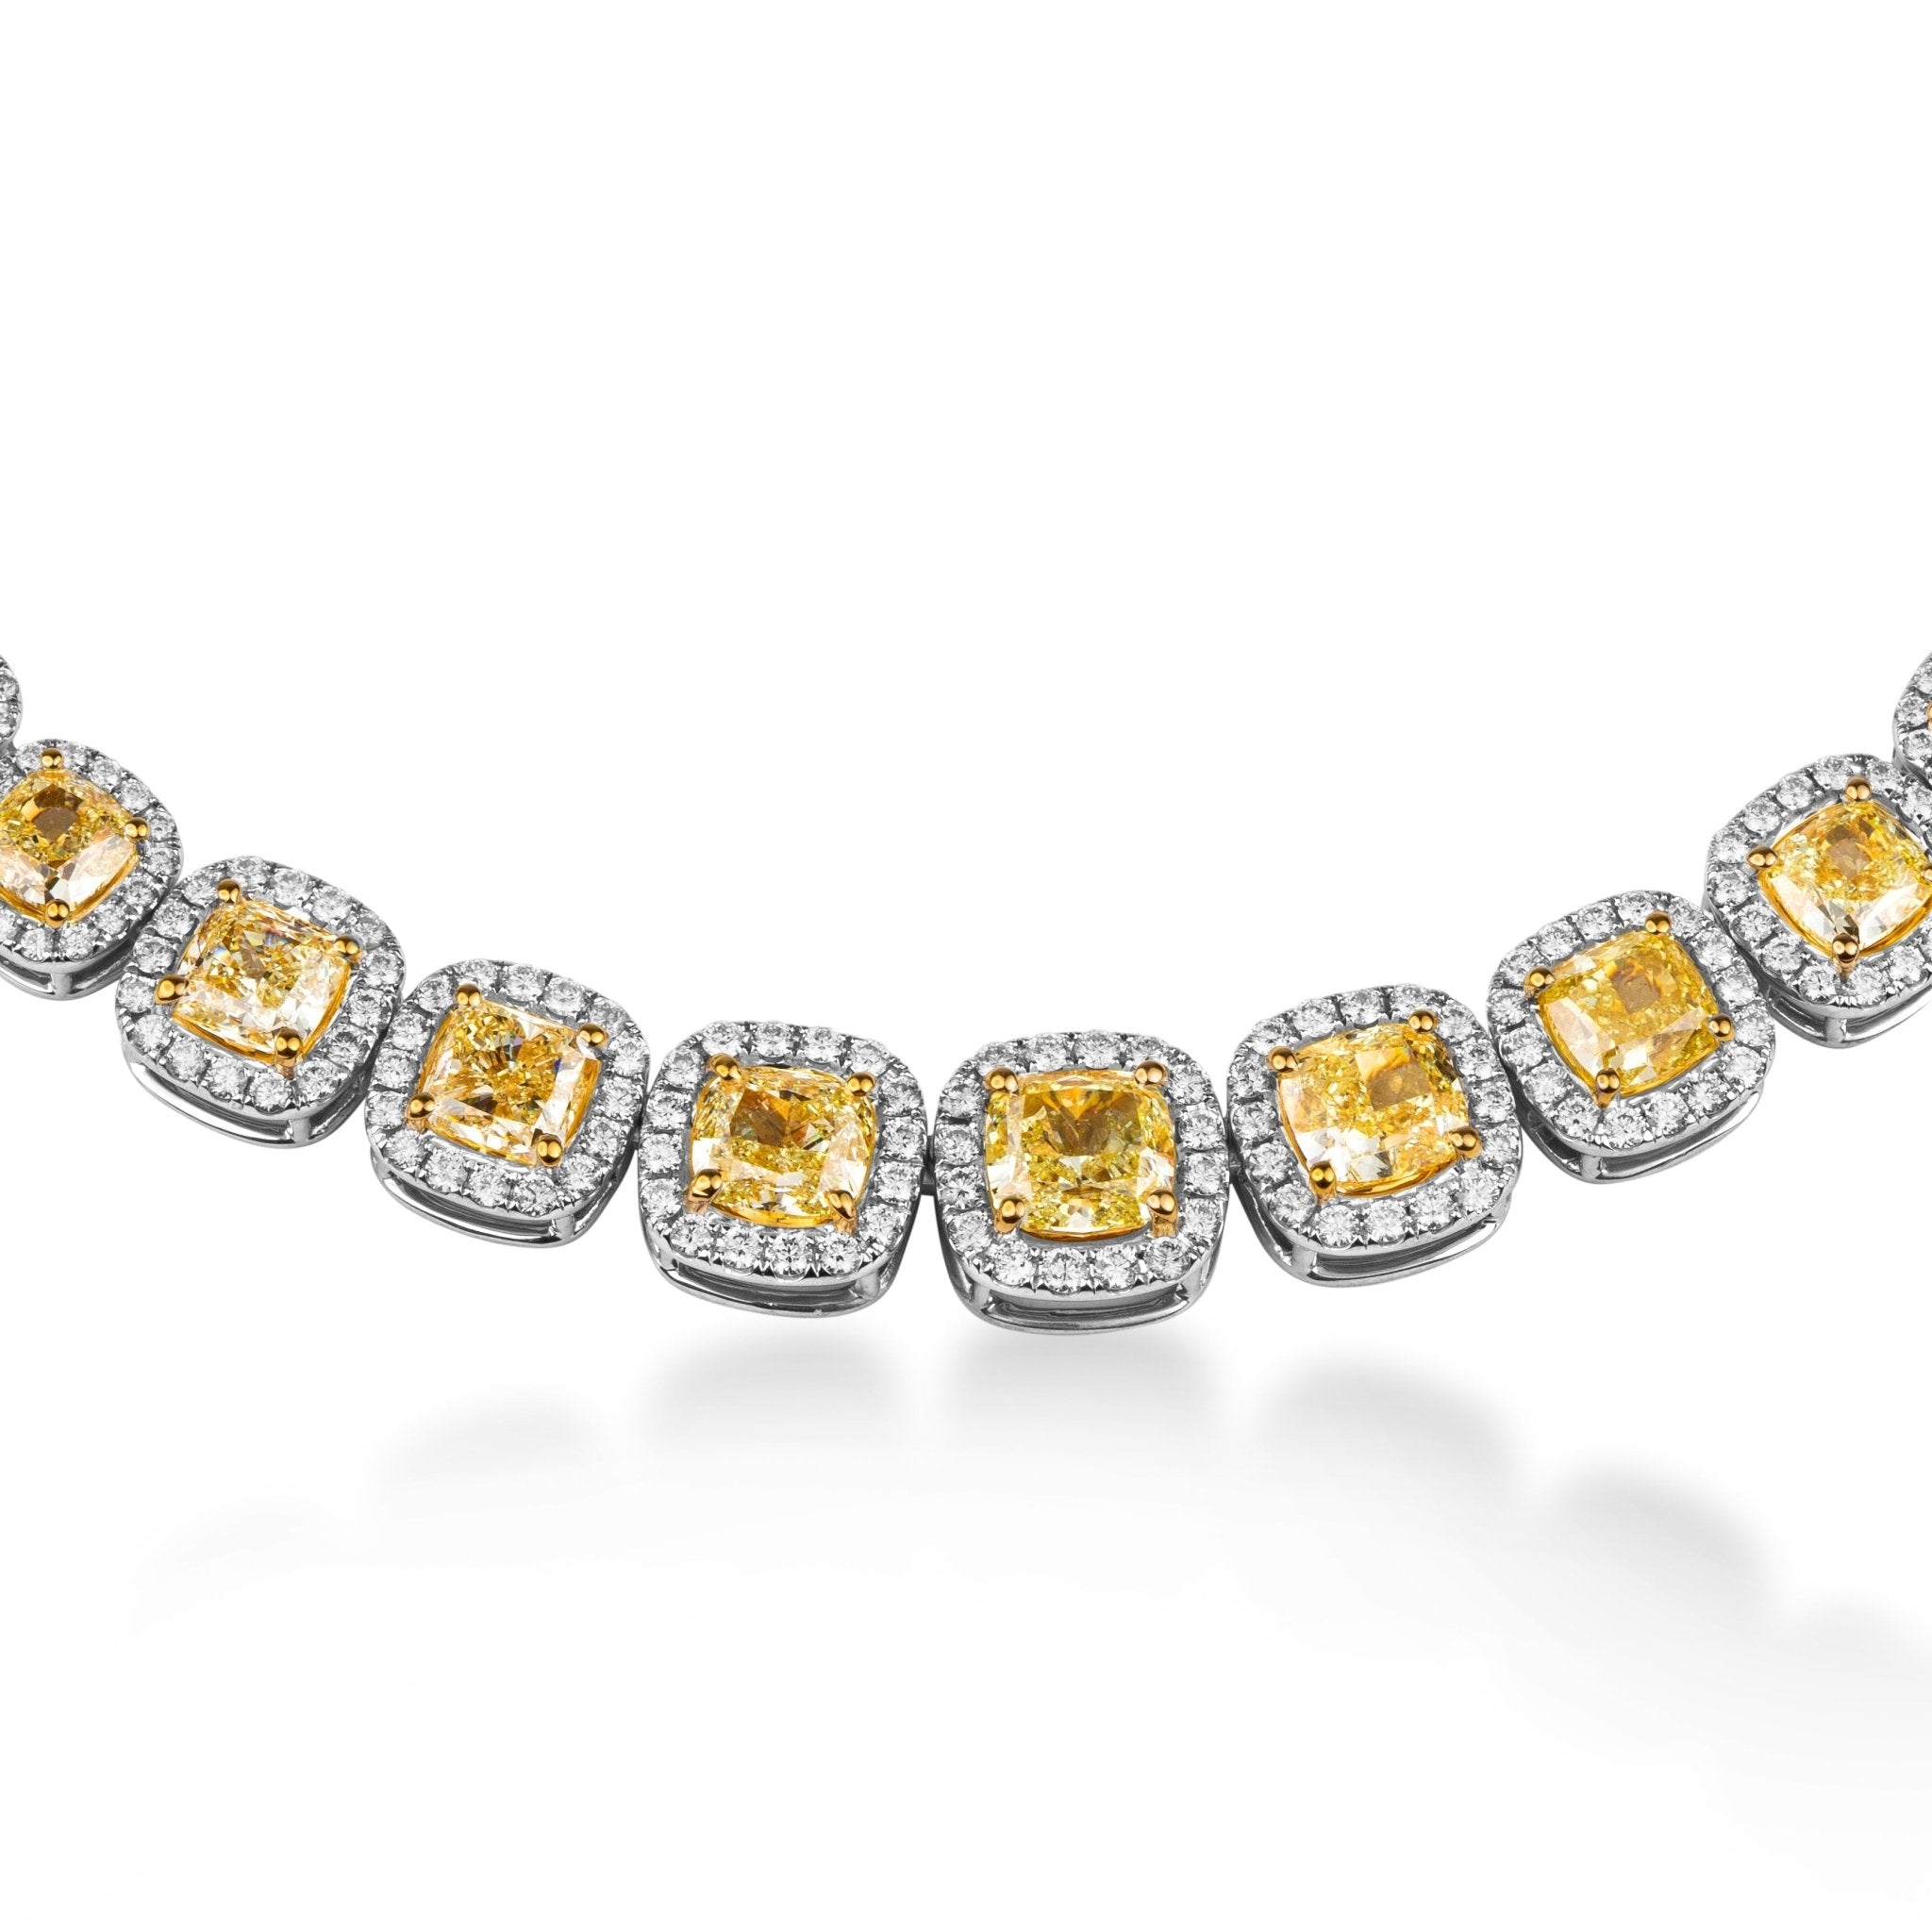 Important Fancy Yellow Diamond Bracelet — Your Most Trusted Brand for Fine  Jewelry & Custom Design in Yardley, PA